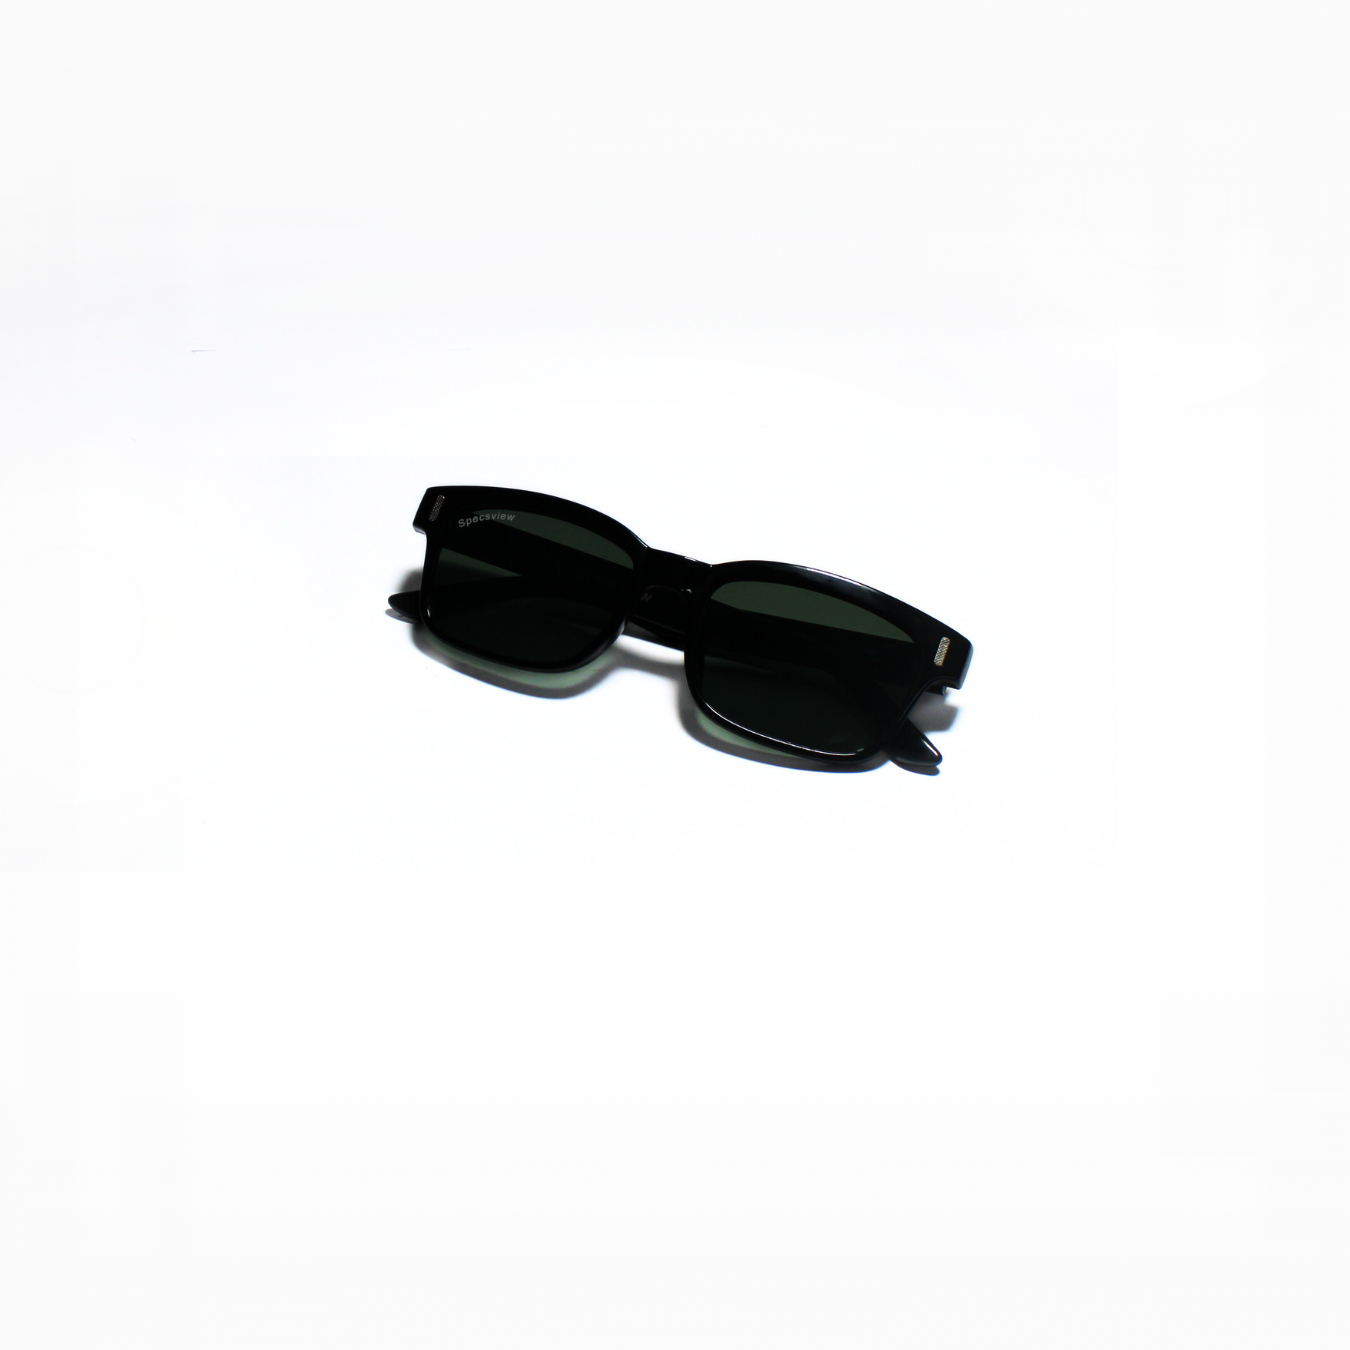 SPECTRE//002 I Sunglasses for Men and Women - Specsview